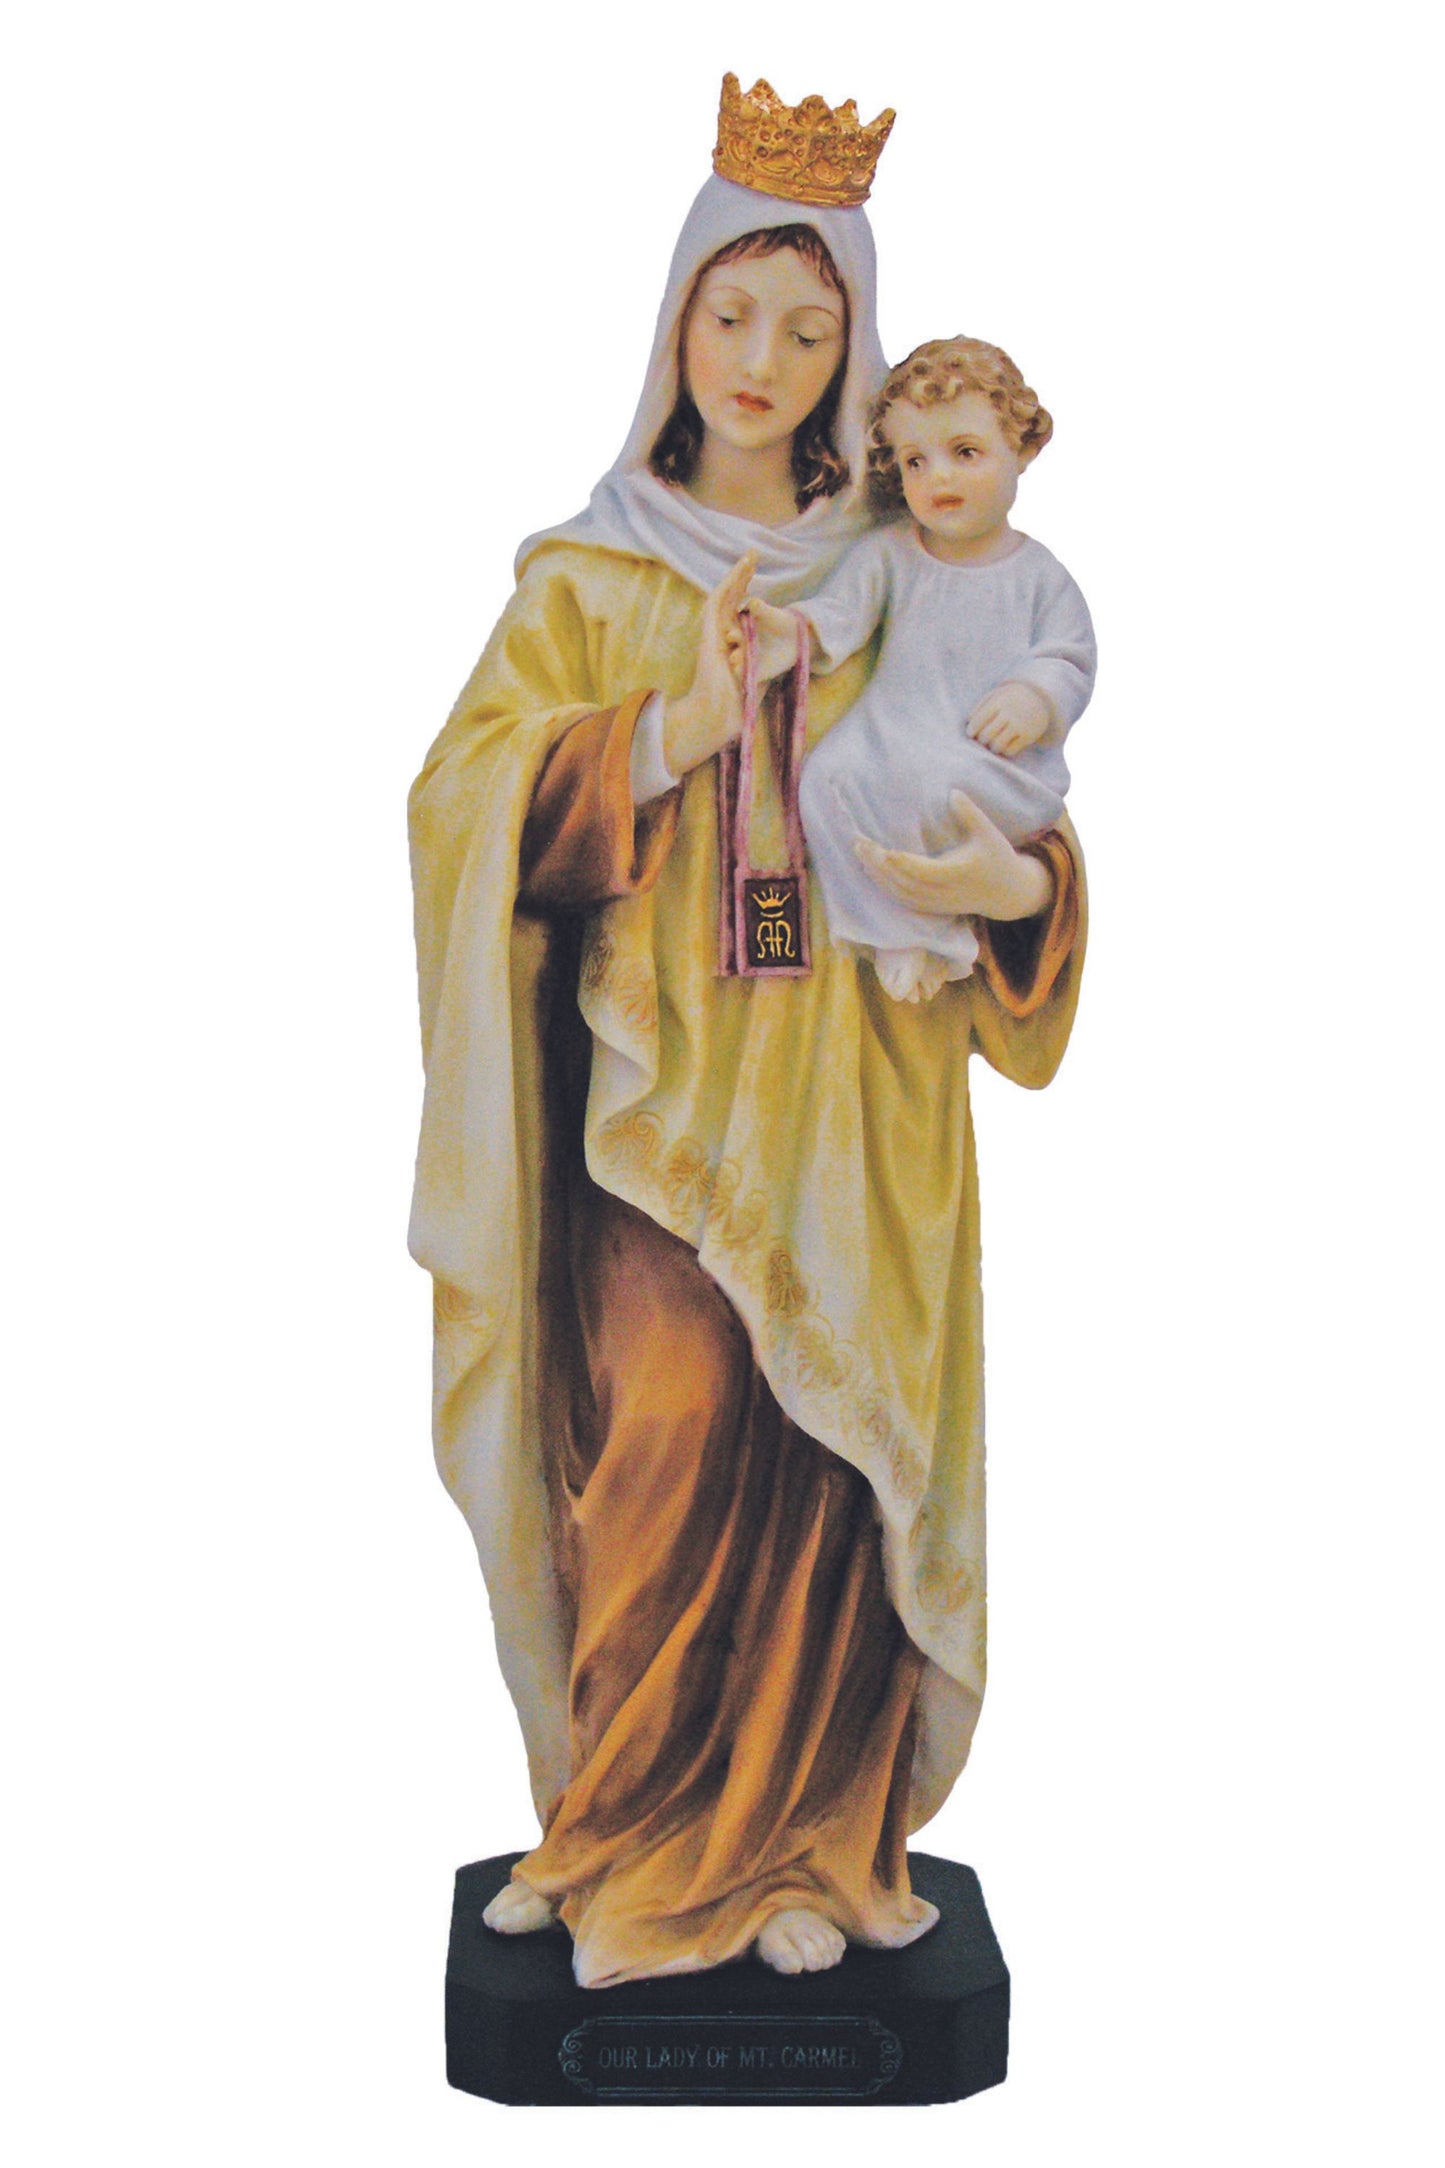 SR-76177-C Our Lady of Mt. Carmel in Color 10"